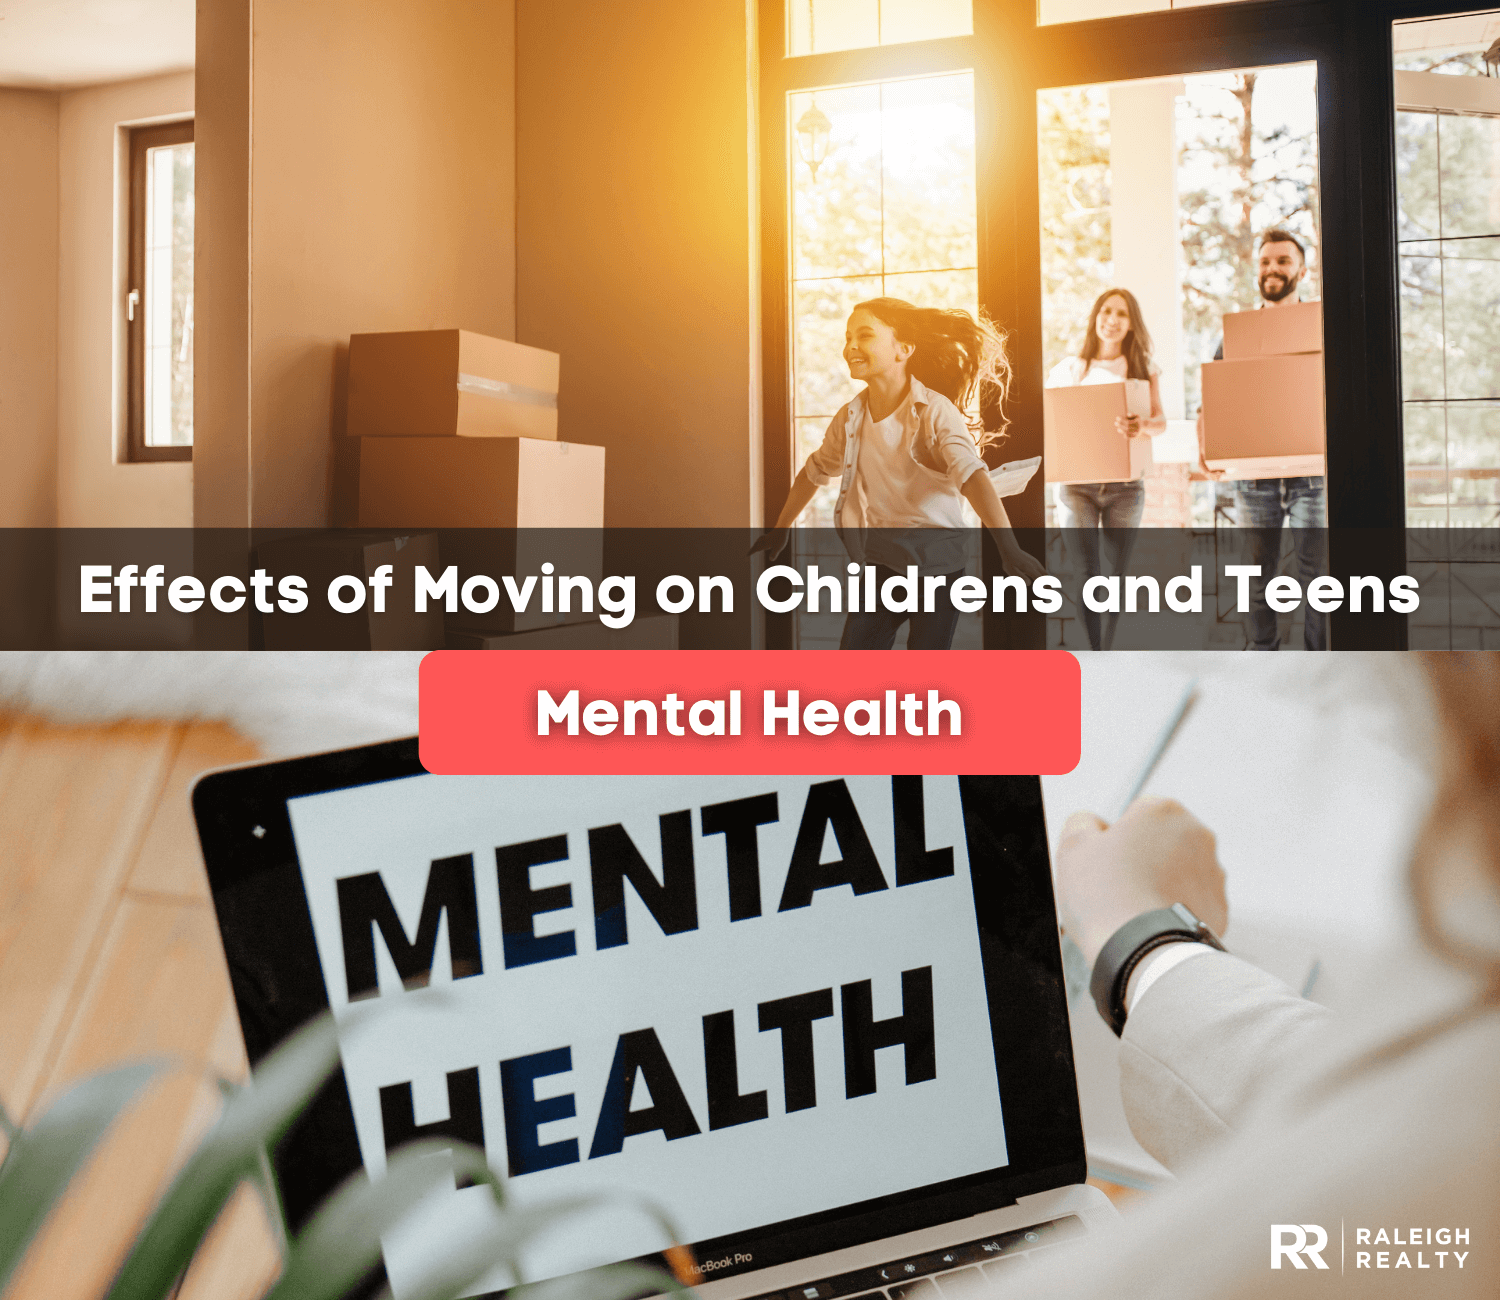 The Effects of Moving on Children's and Teens Mental Health